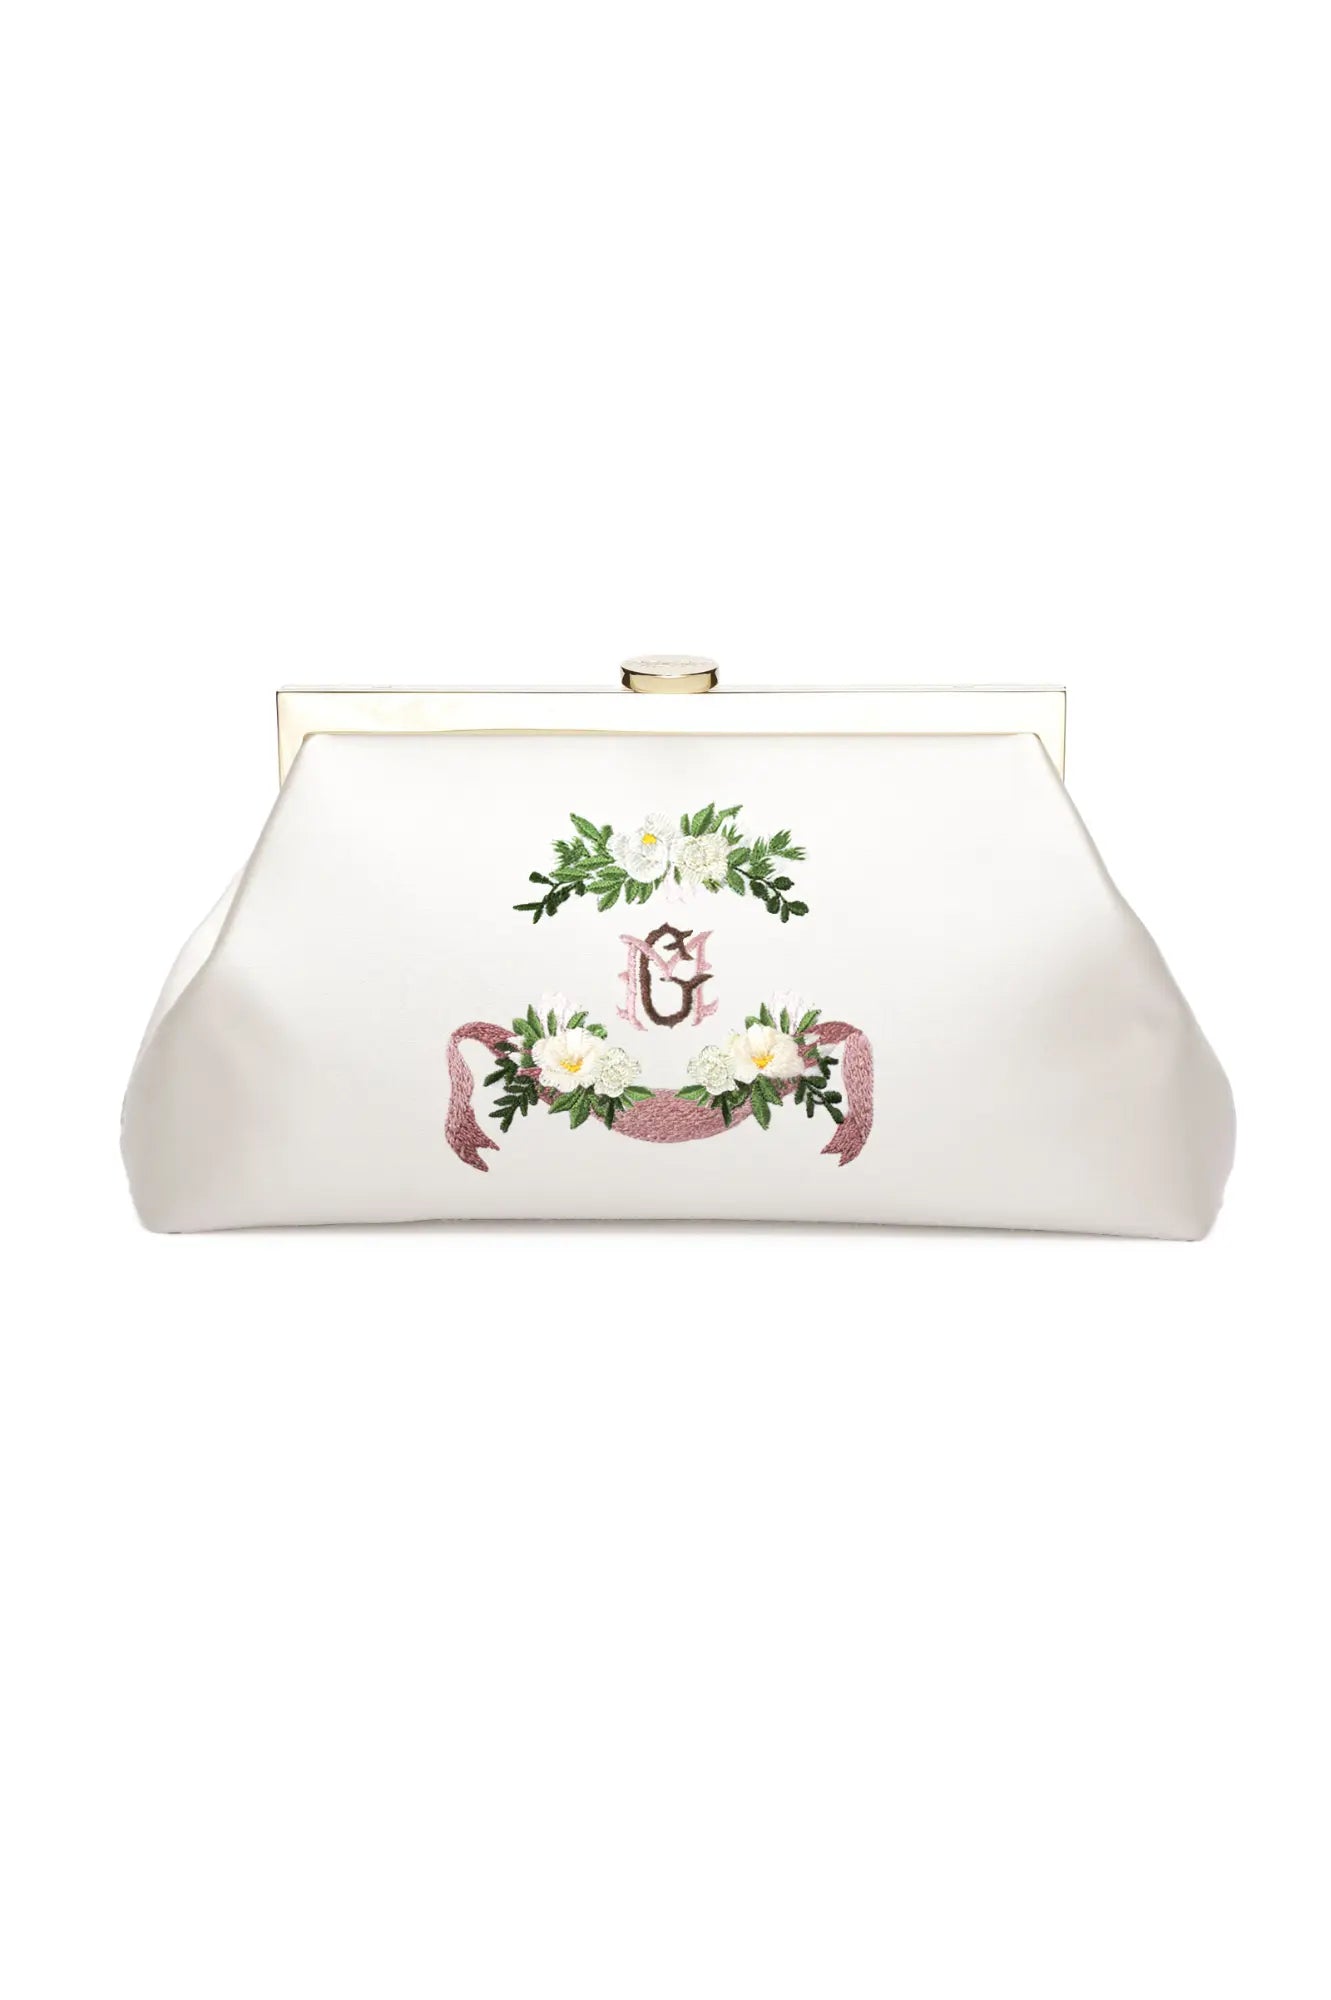 The Bella Rosa Collection's Rosa Clutch Monogram Embroidery with floral embroidery and clasp closure, personalized wedding accessory.